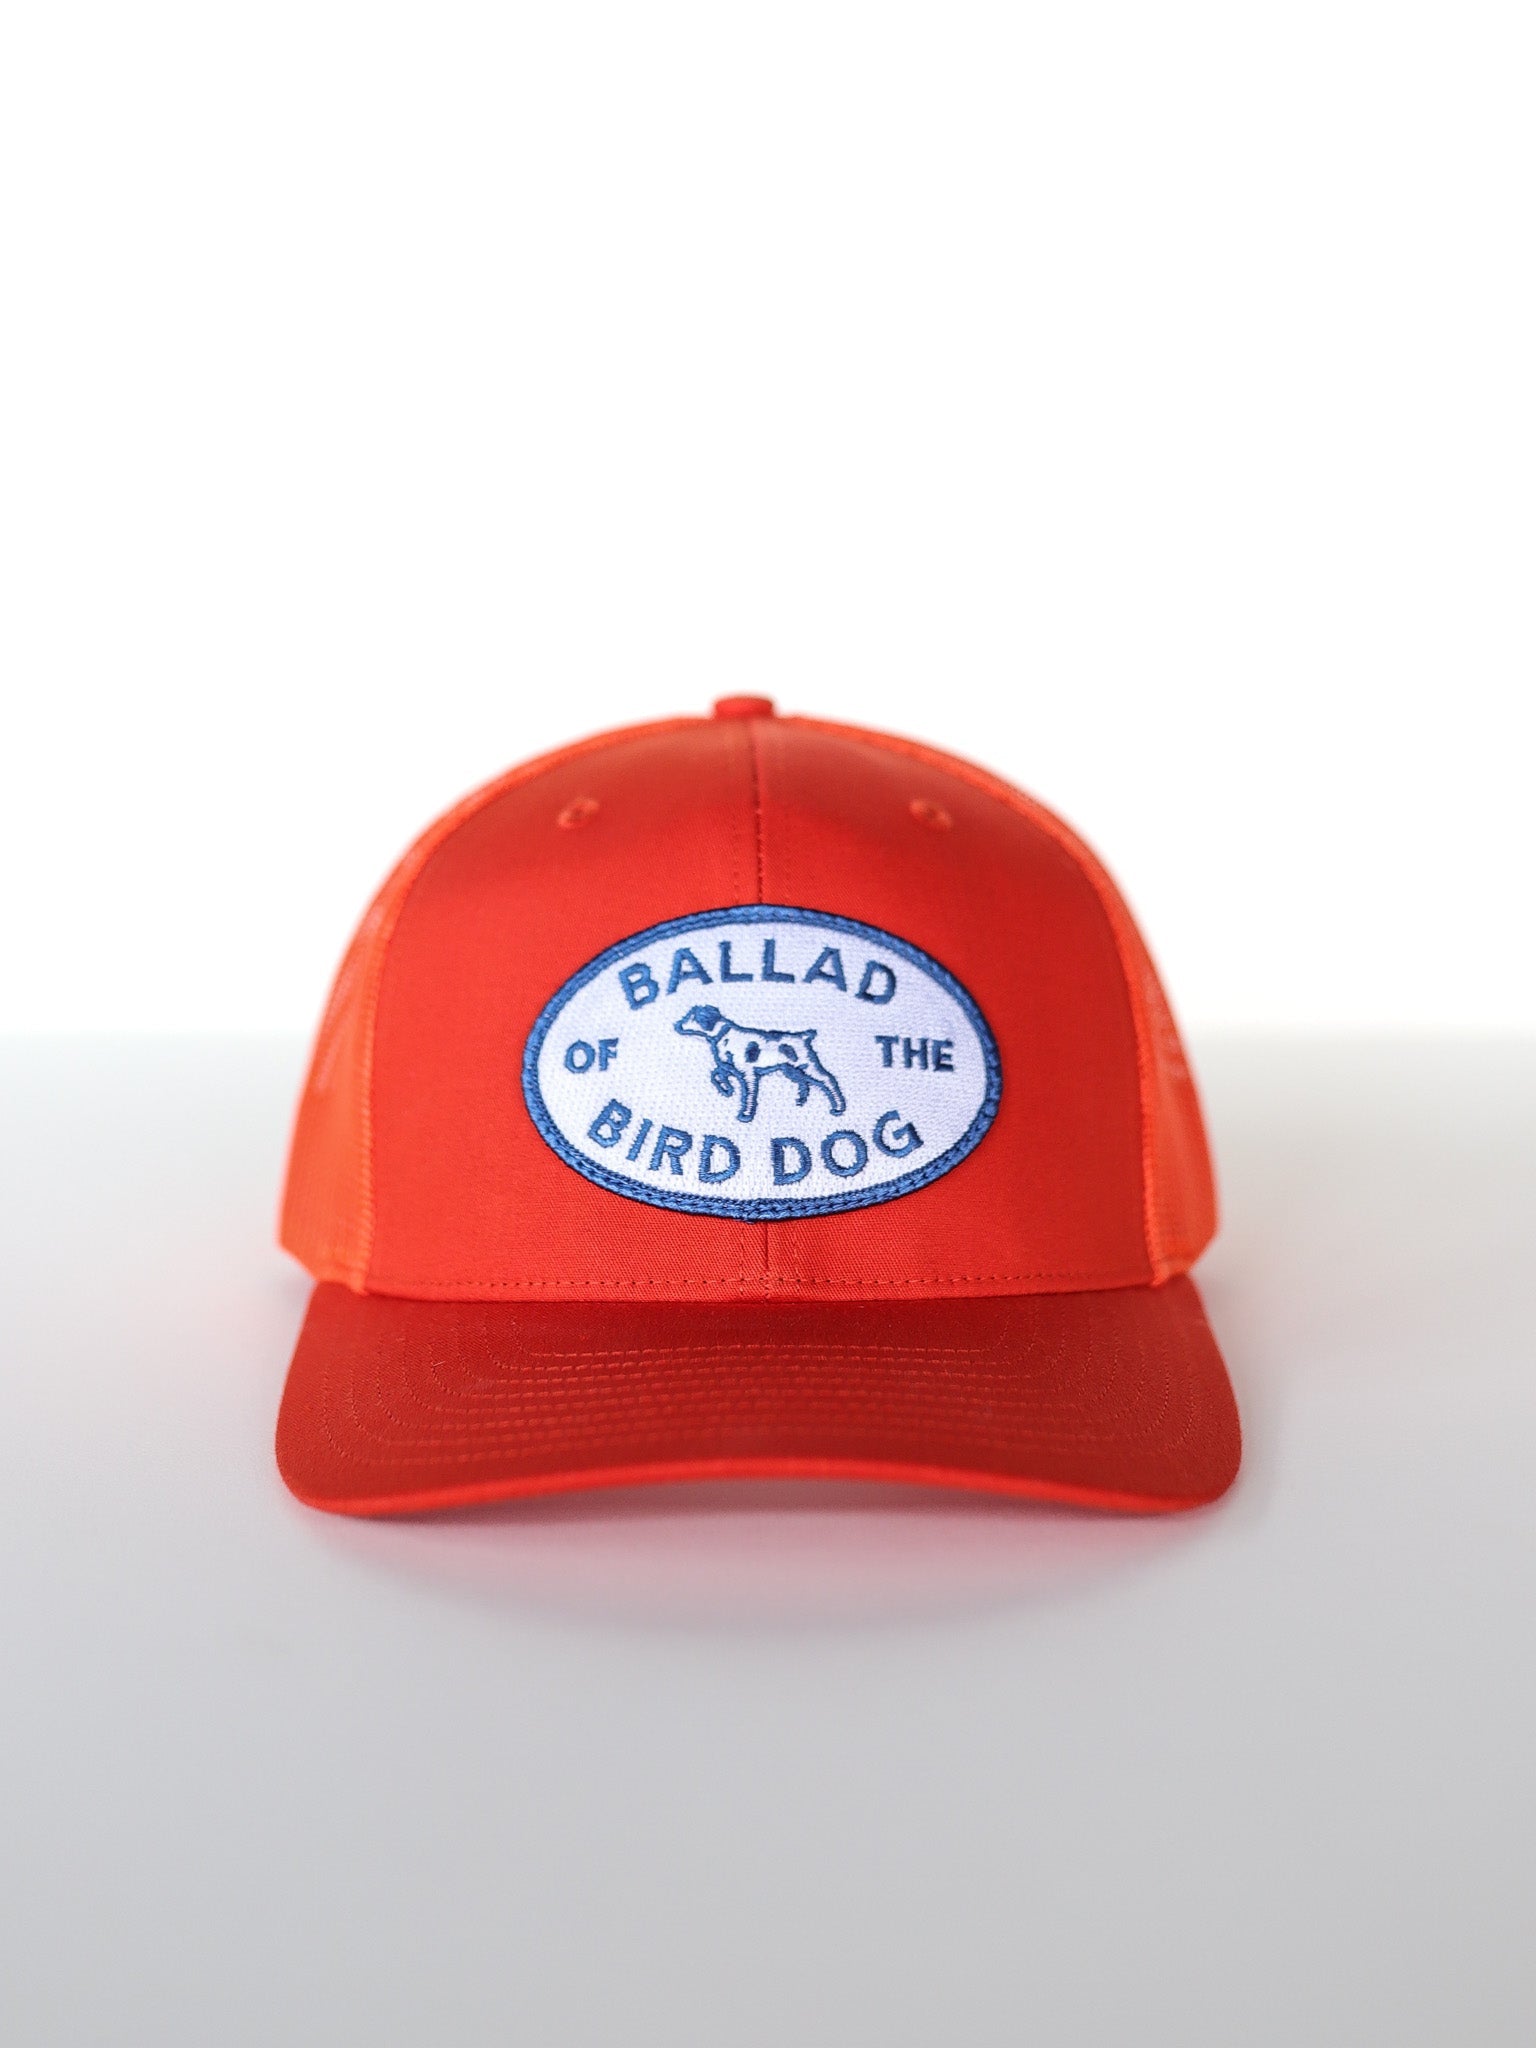 Shop Hat | Upland Patch Ballad Of The Bird Dog - Oval